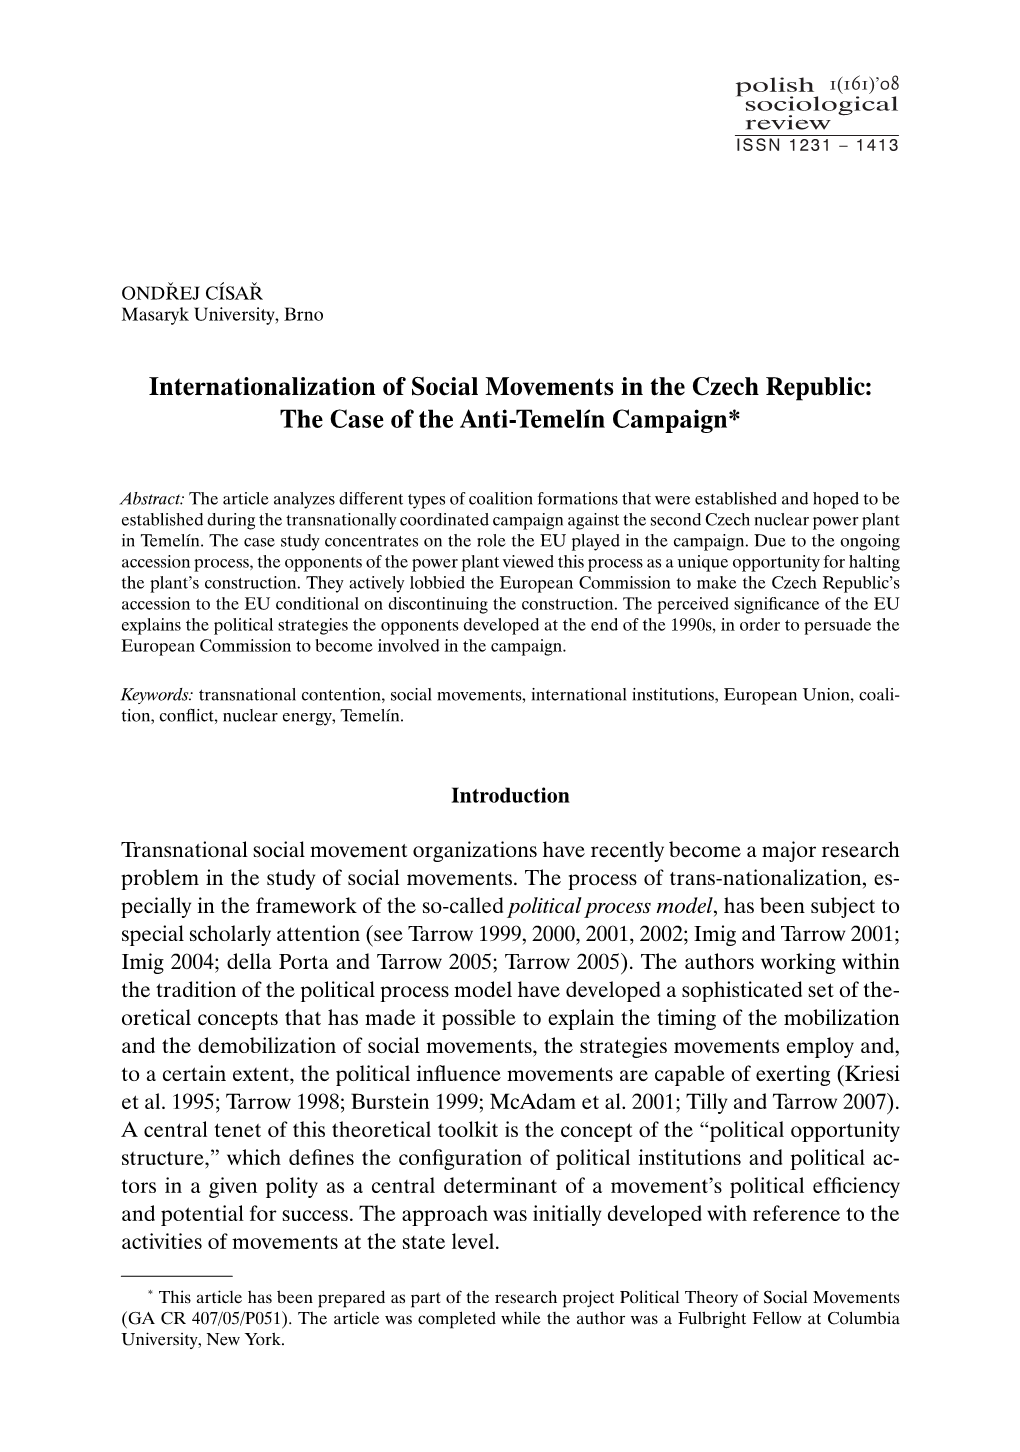 Internationalization of Social Movements in the Czech Republic: the Case of the Anti-Temelín Campaign*